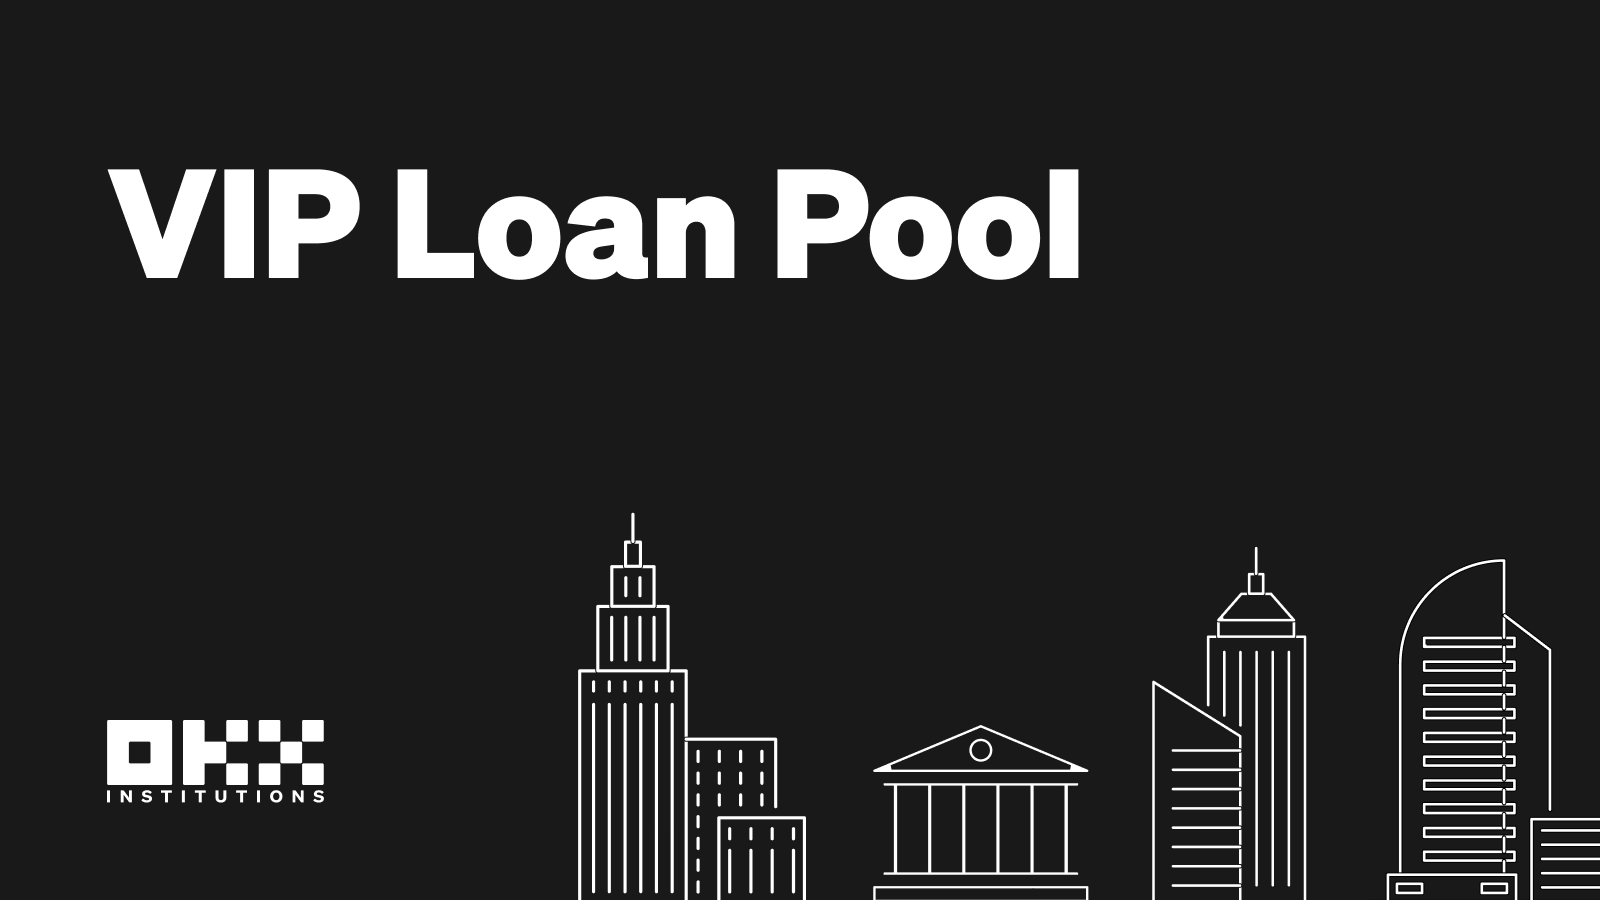 Better capital efficiency, lower risk: Introducing the VIP Loan Pool